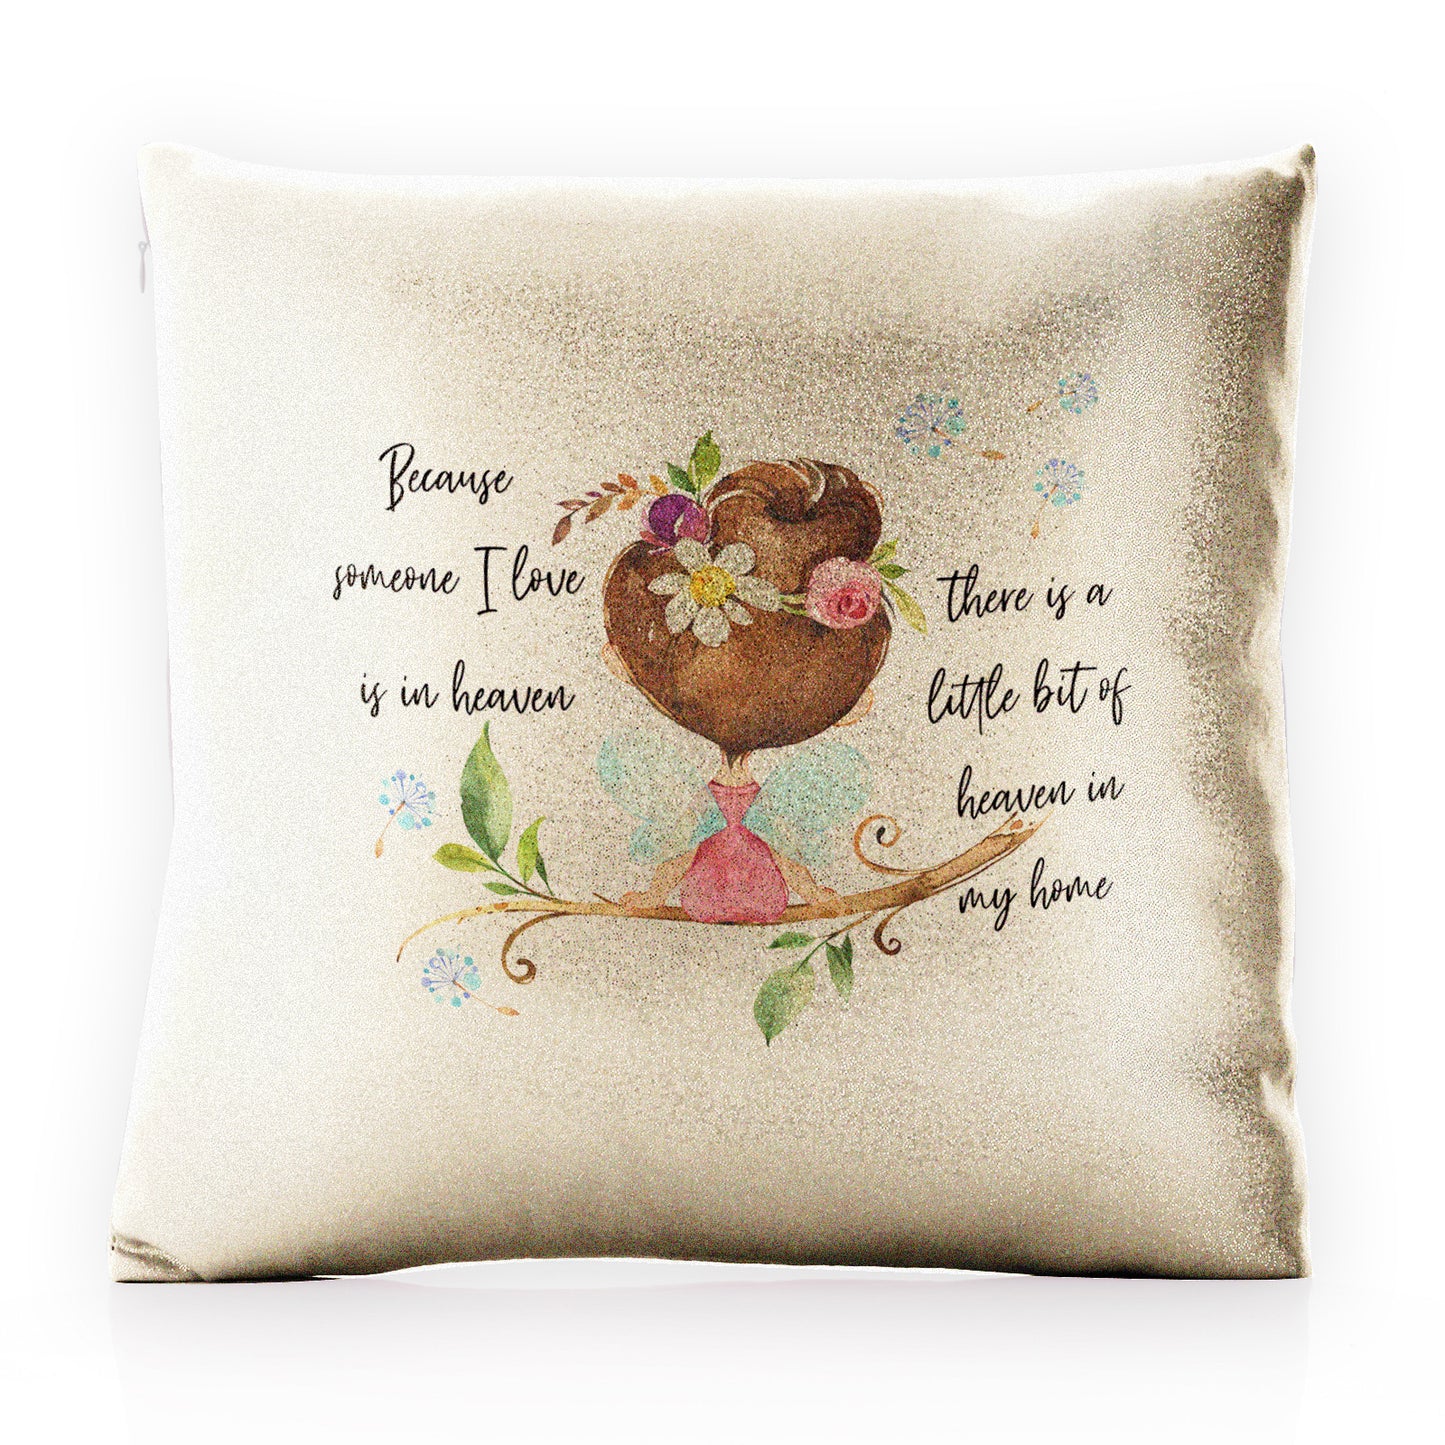 Personalised Glitter Cushion with Heaven Love Message